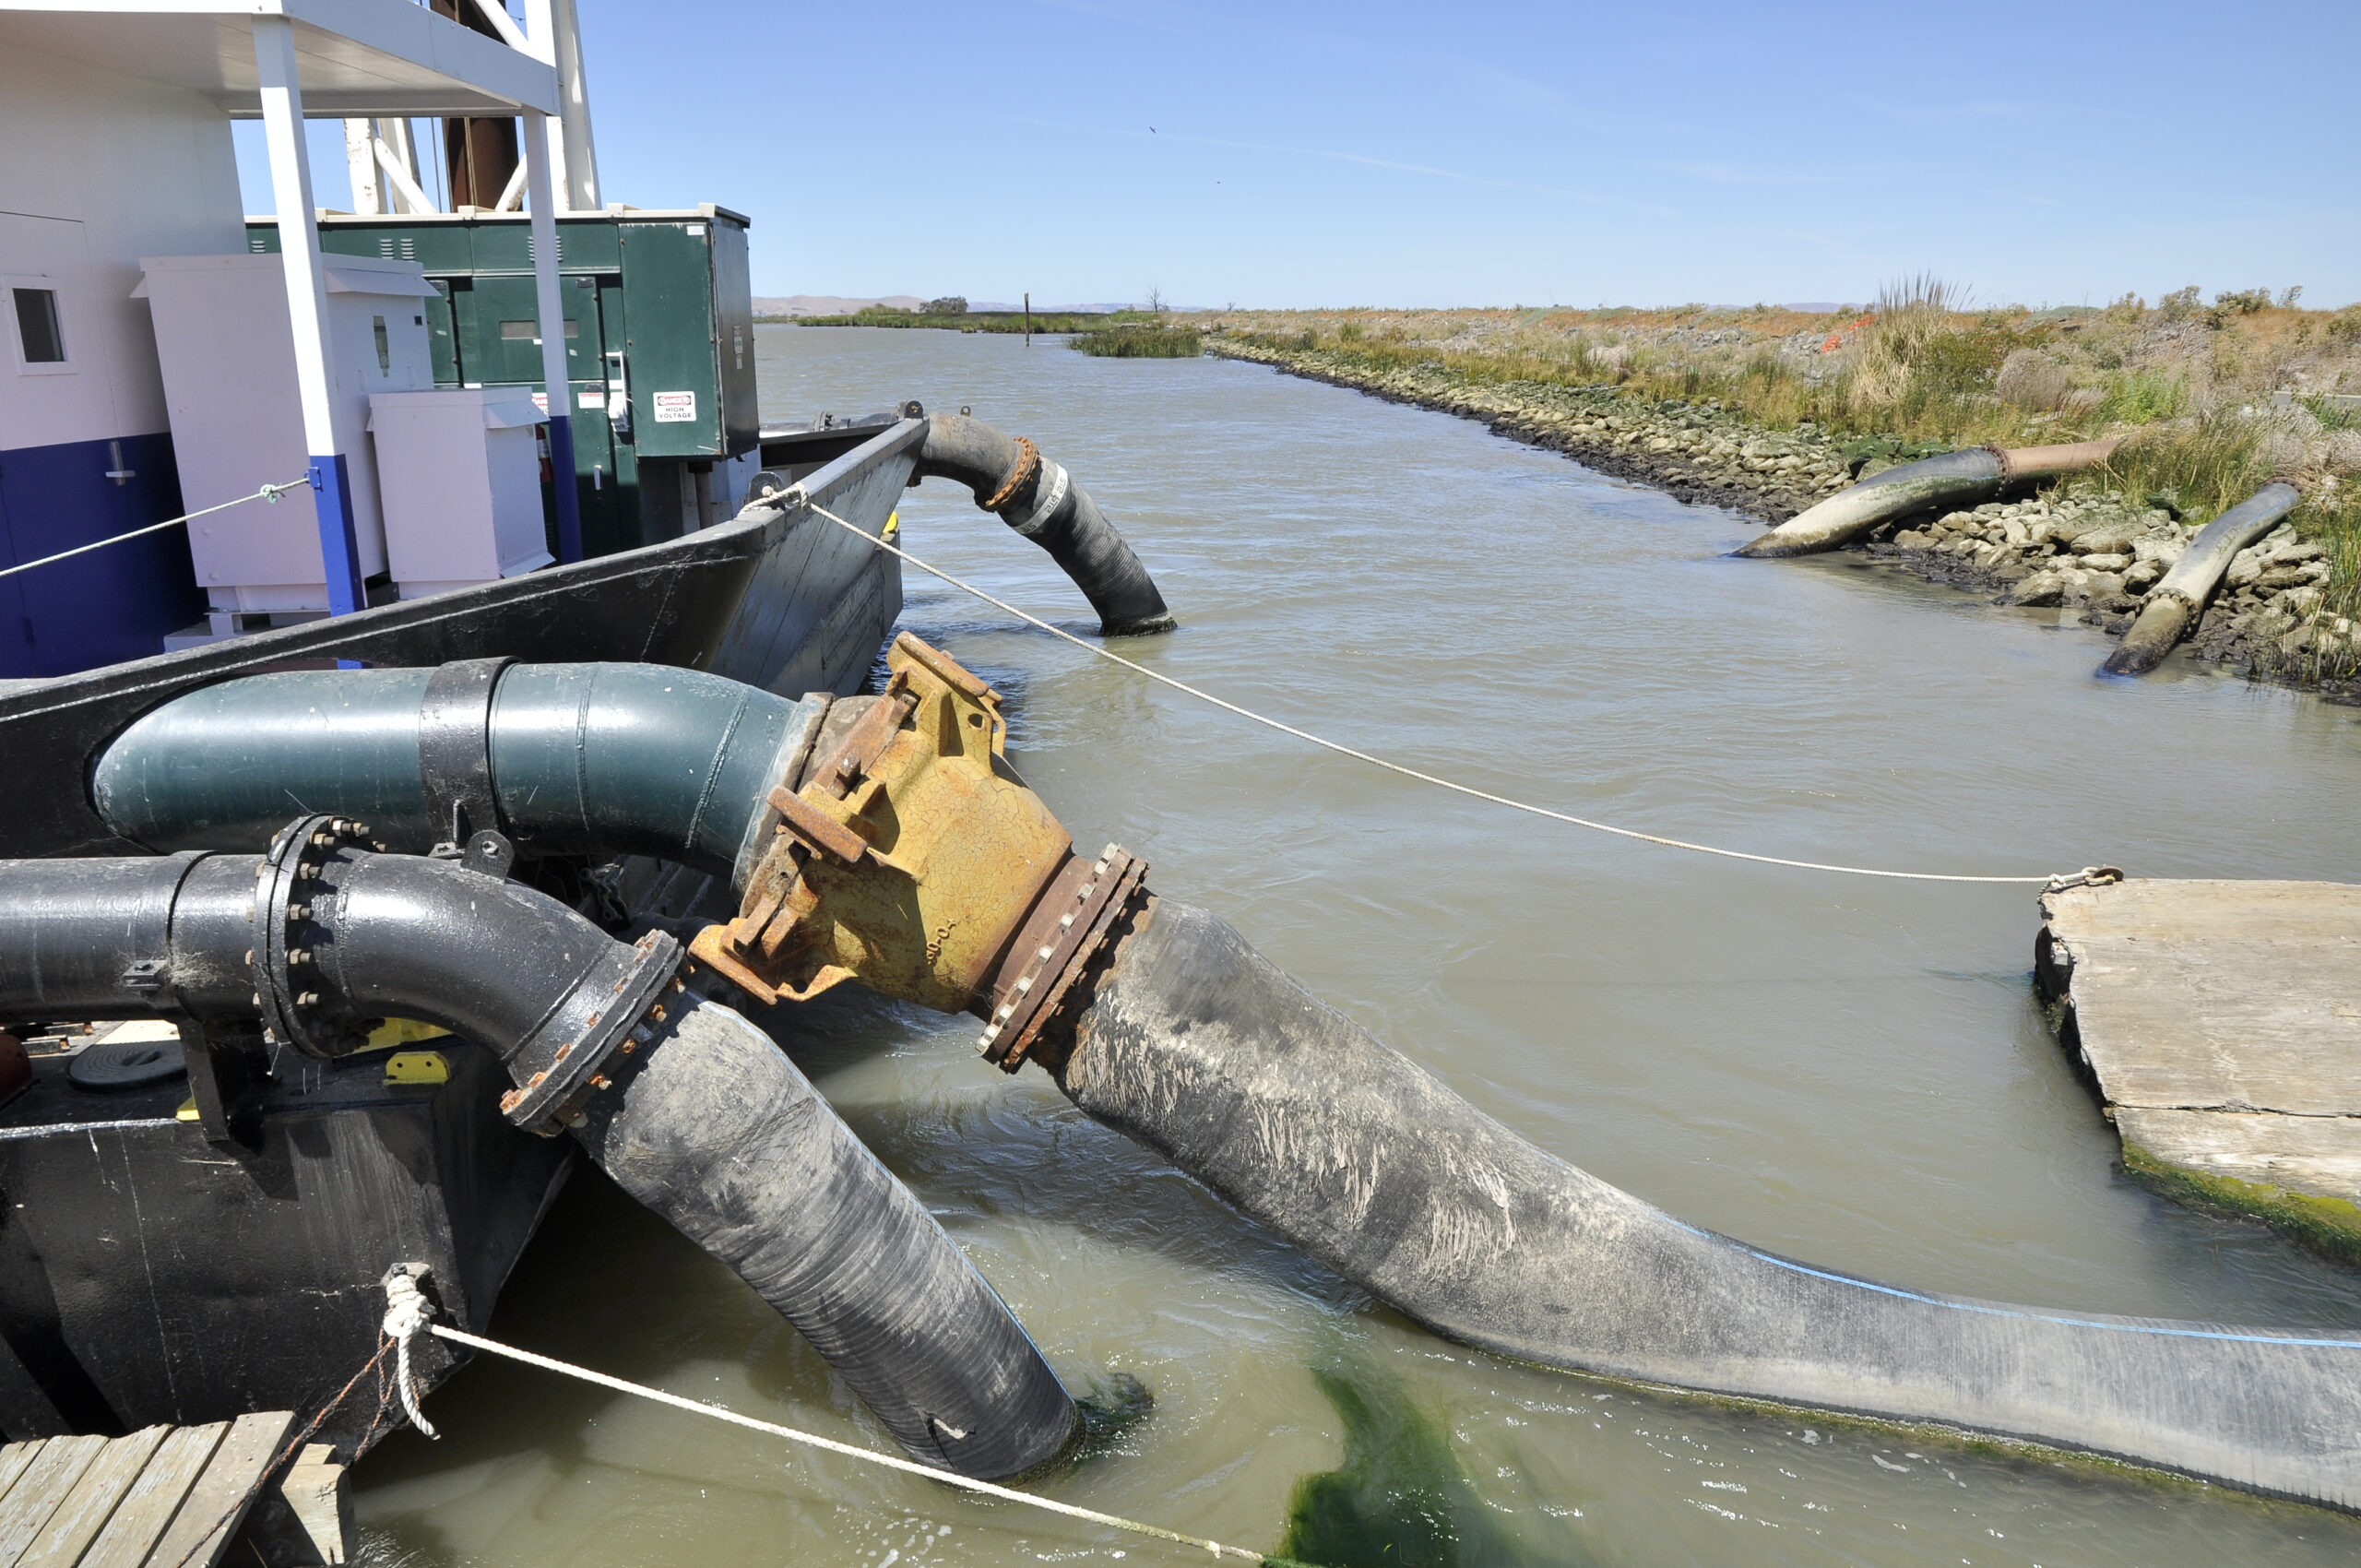 Techniques used to add sediment to the Montezuma Wetlands included hosing it from a sediment laden barge. Photo: Darren Graffuis